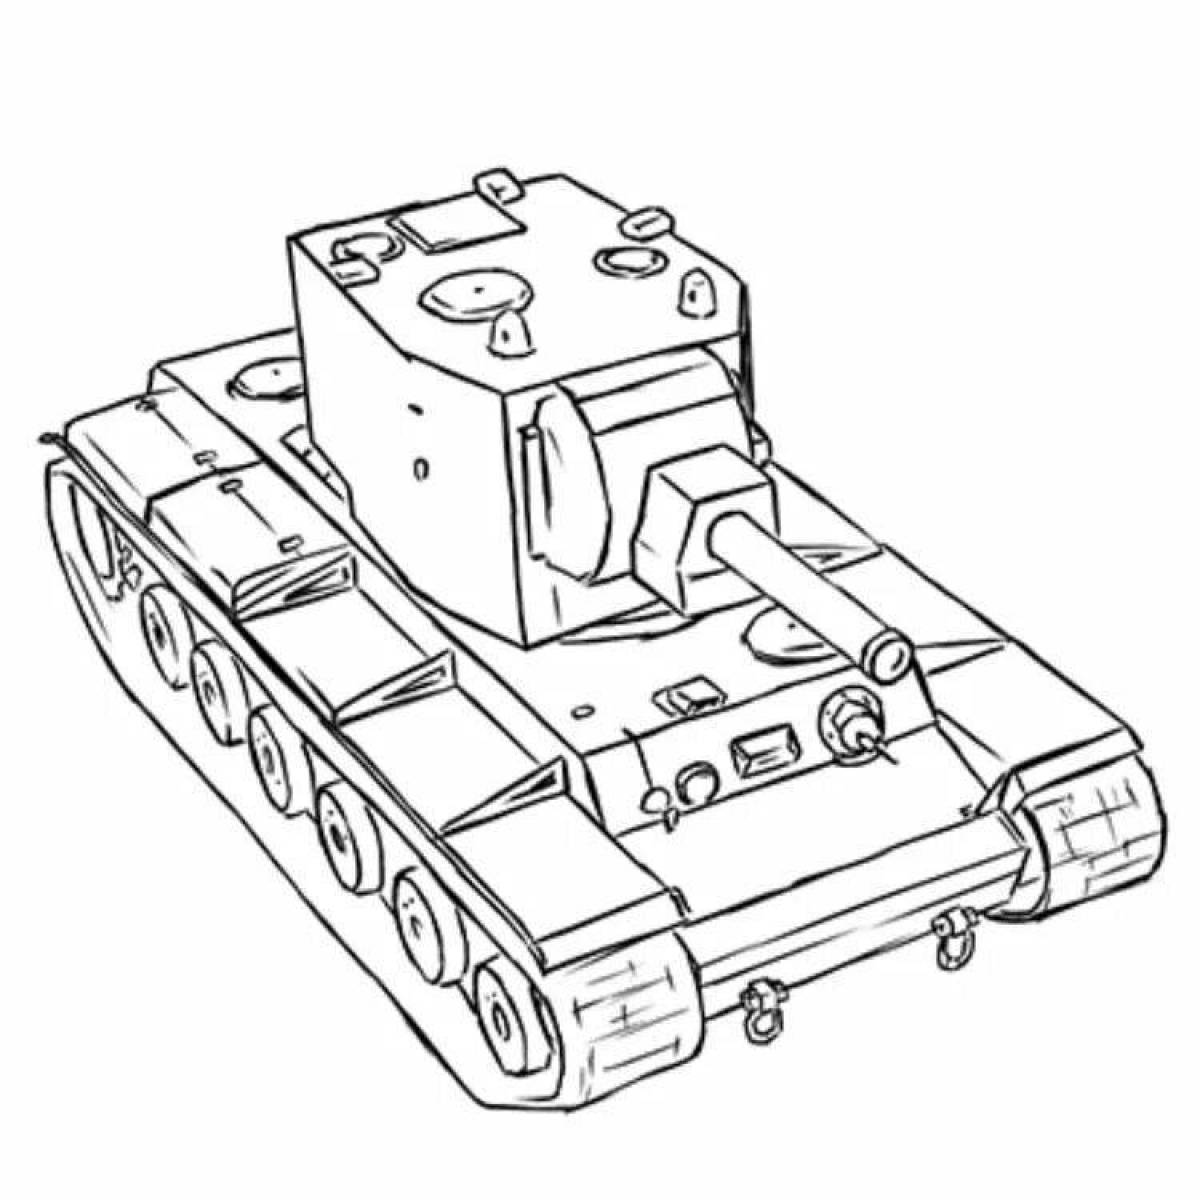 Cute kv2 coloring page